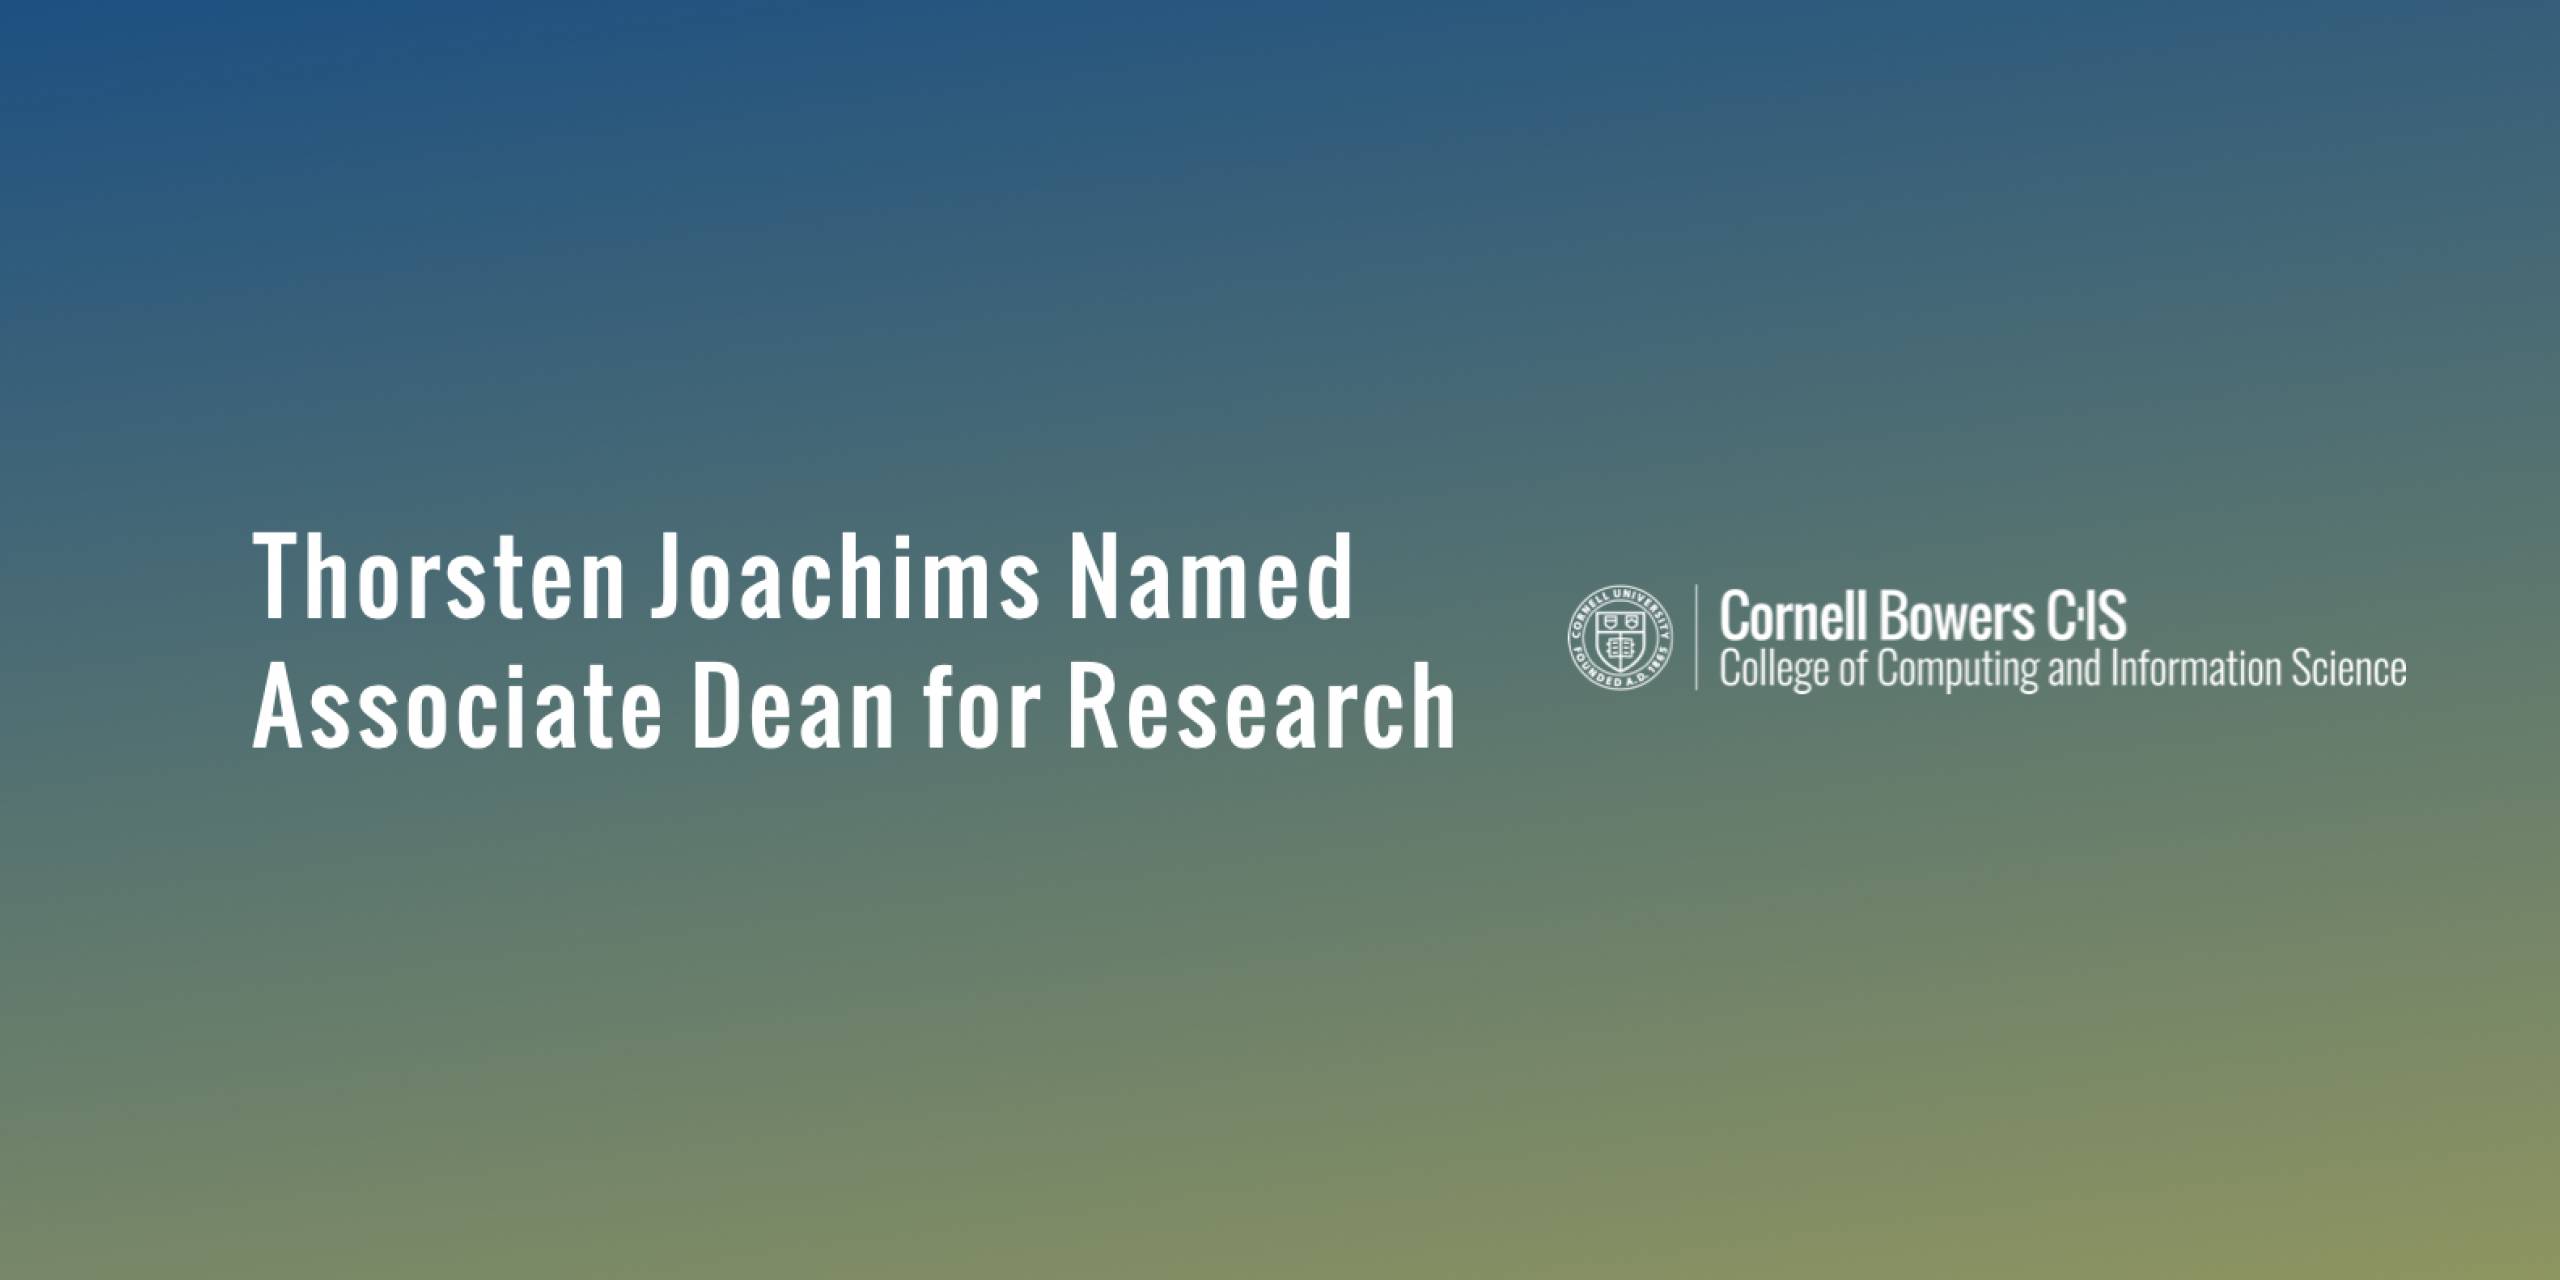 Thorsten Joachims Appointed Inaugural Associate Dean for Research